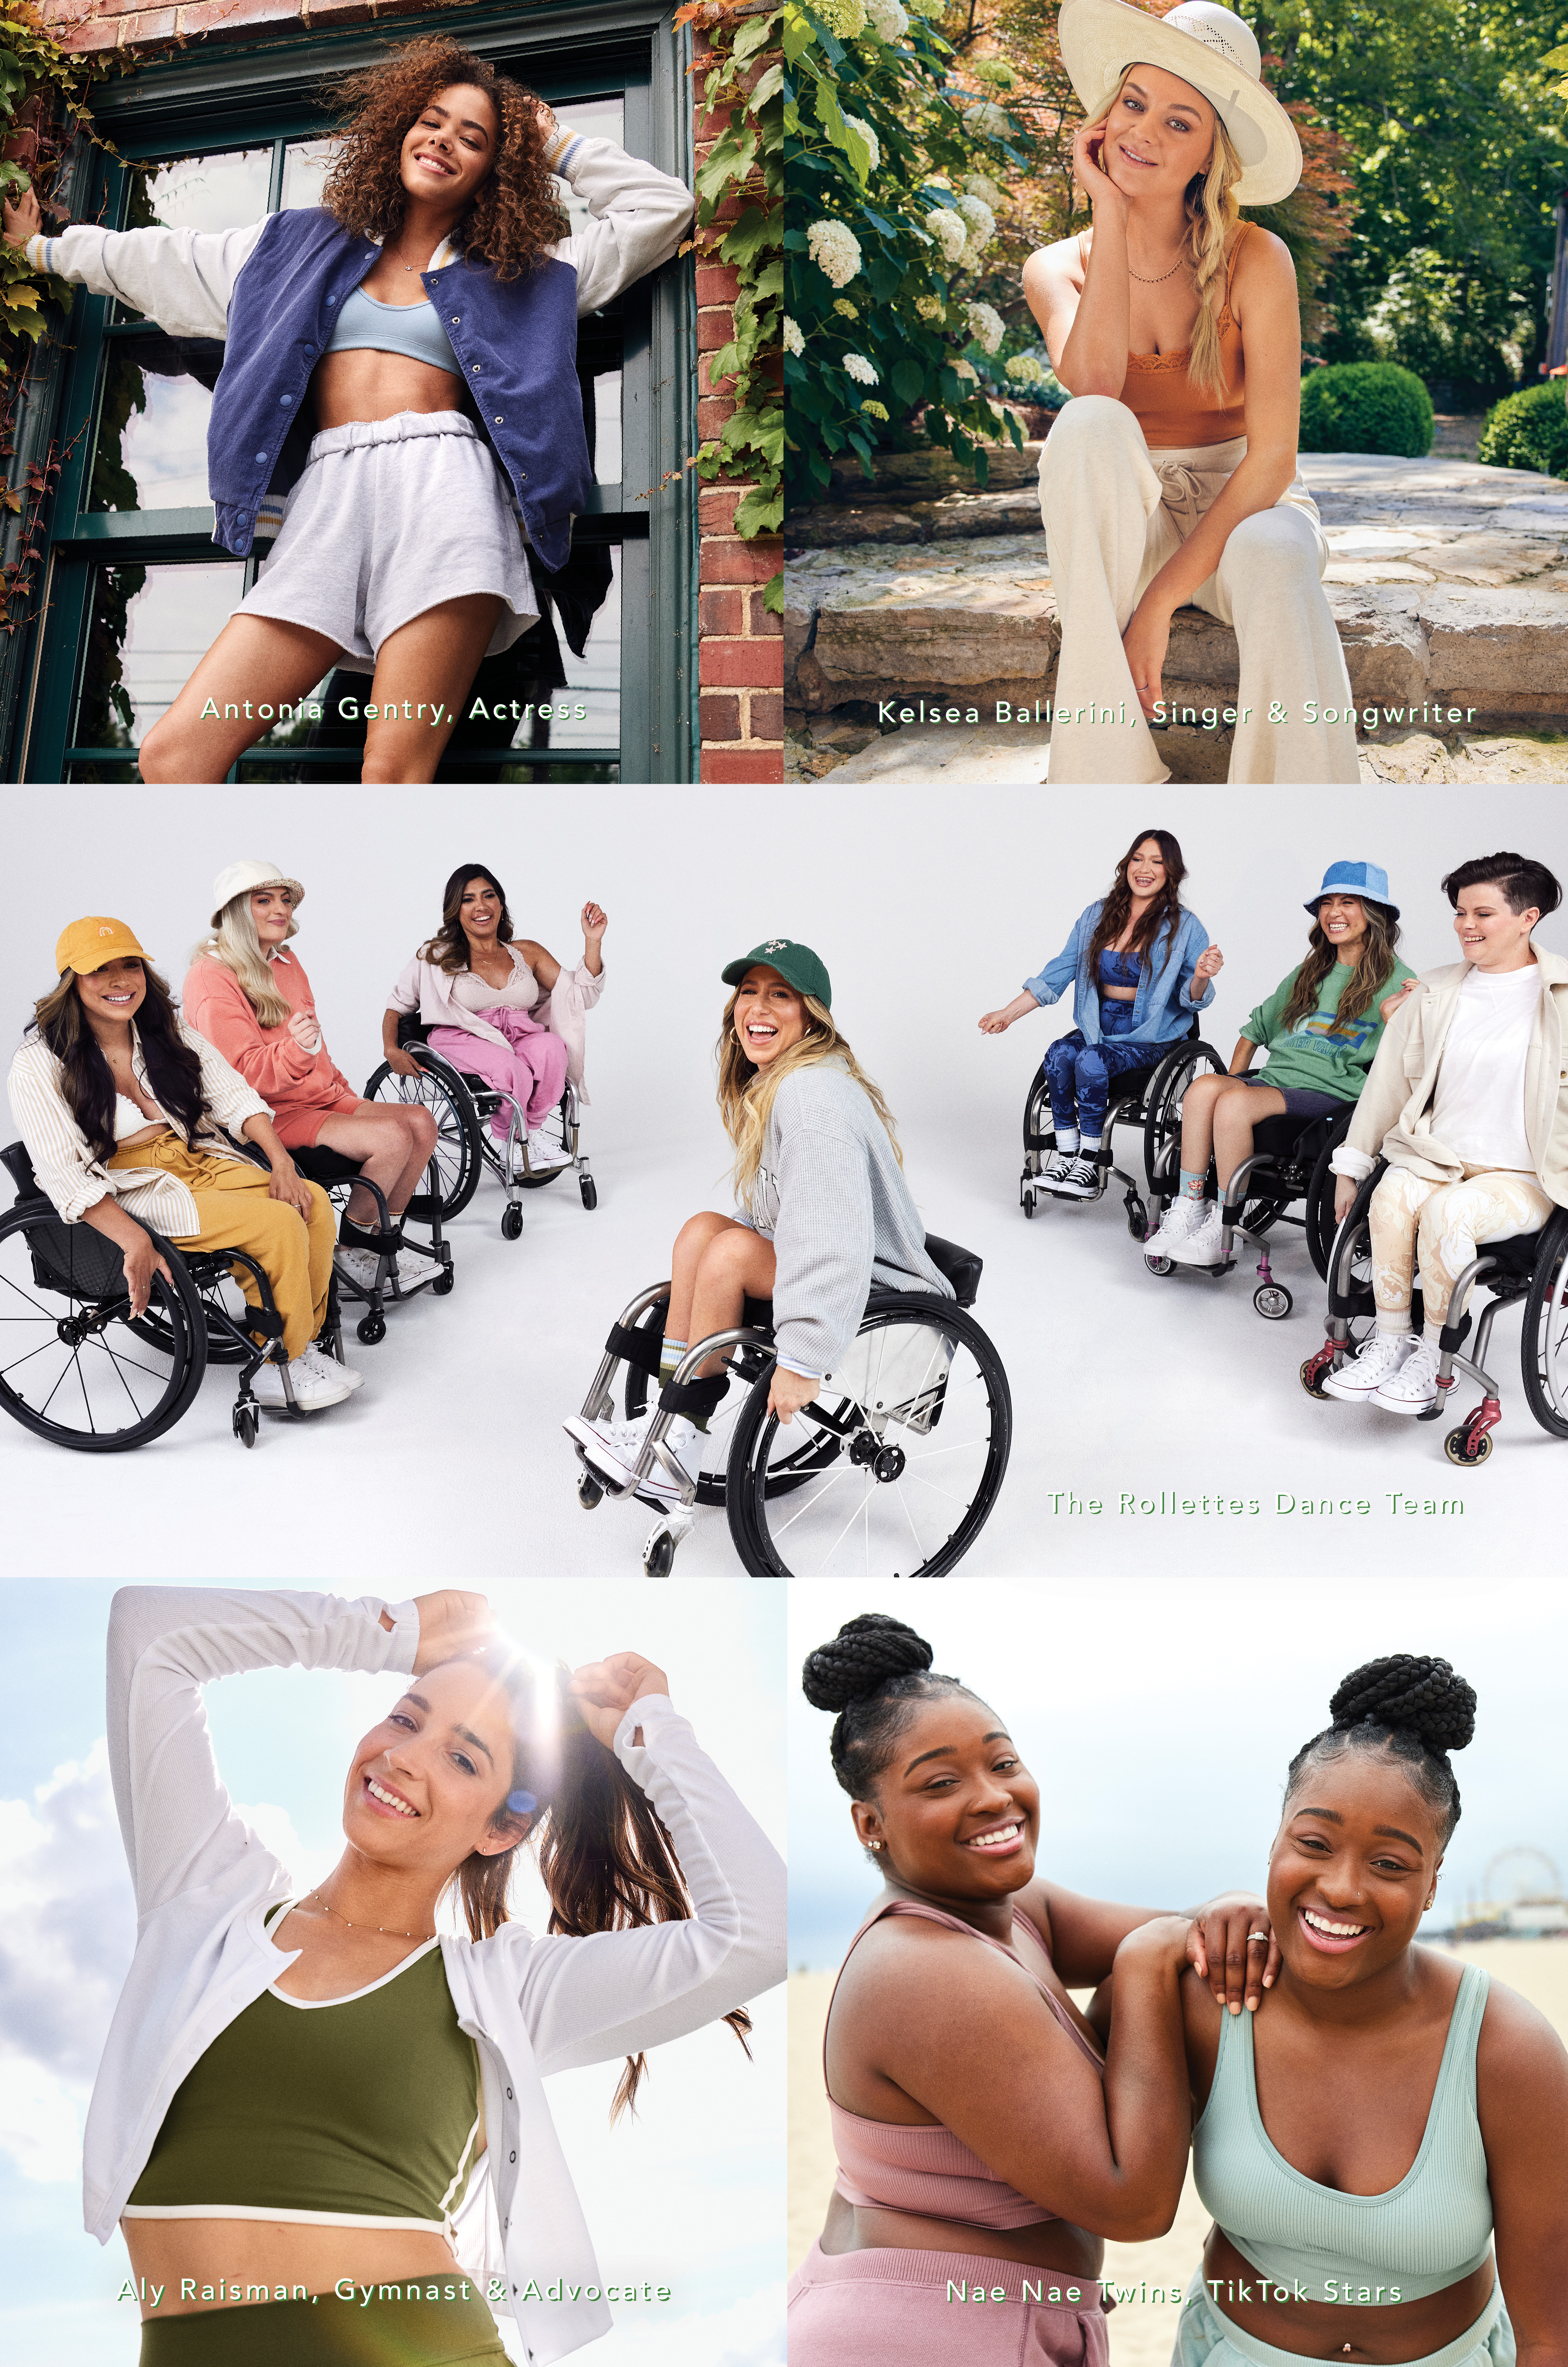 Aerie's New Campaign Features Women with Disabilities and